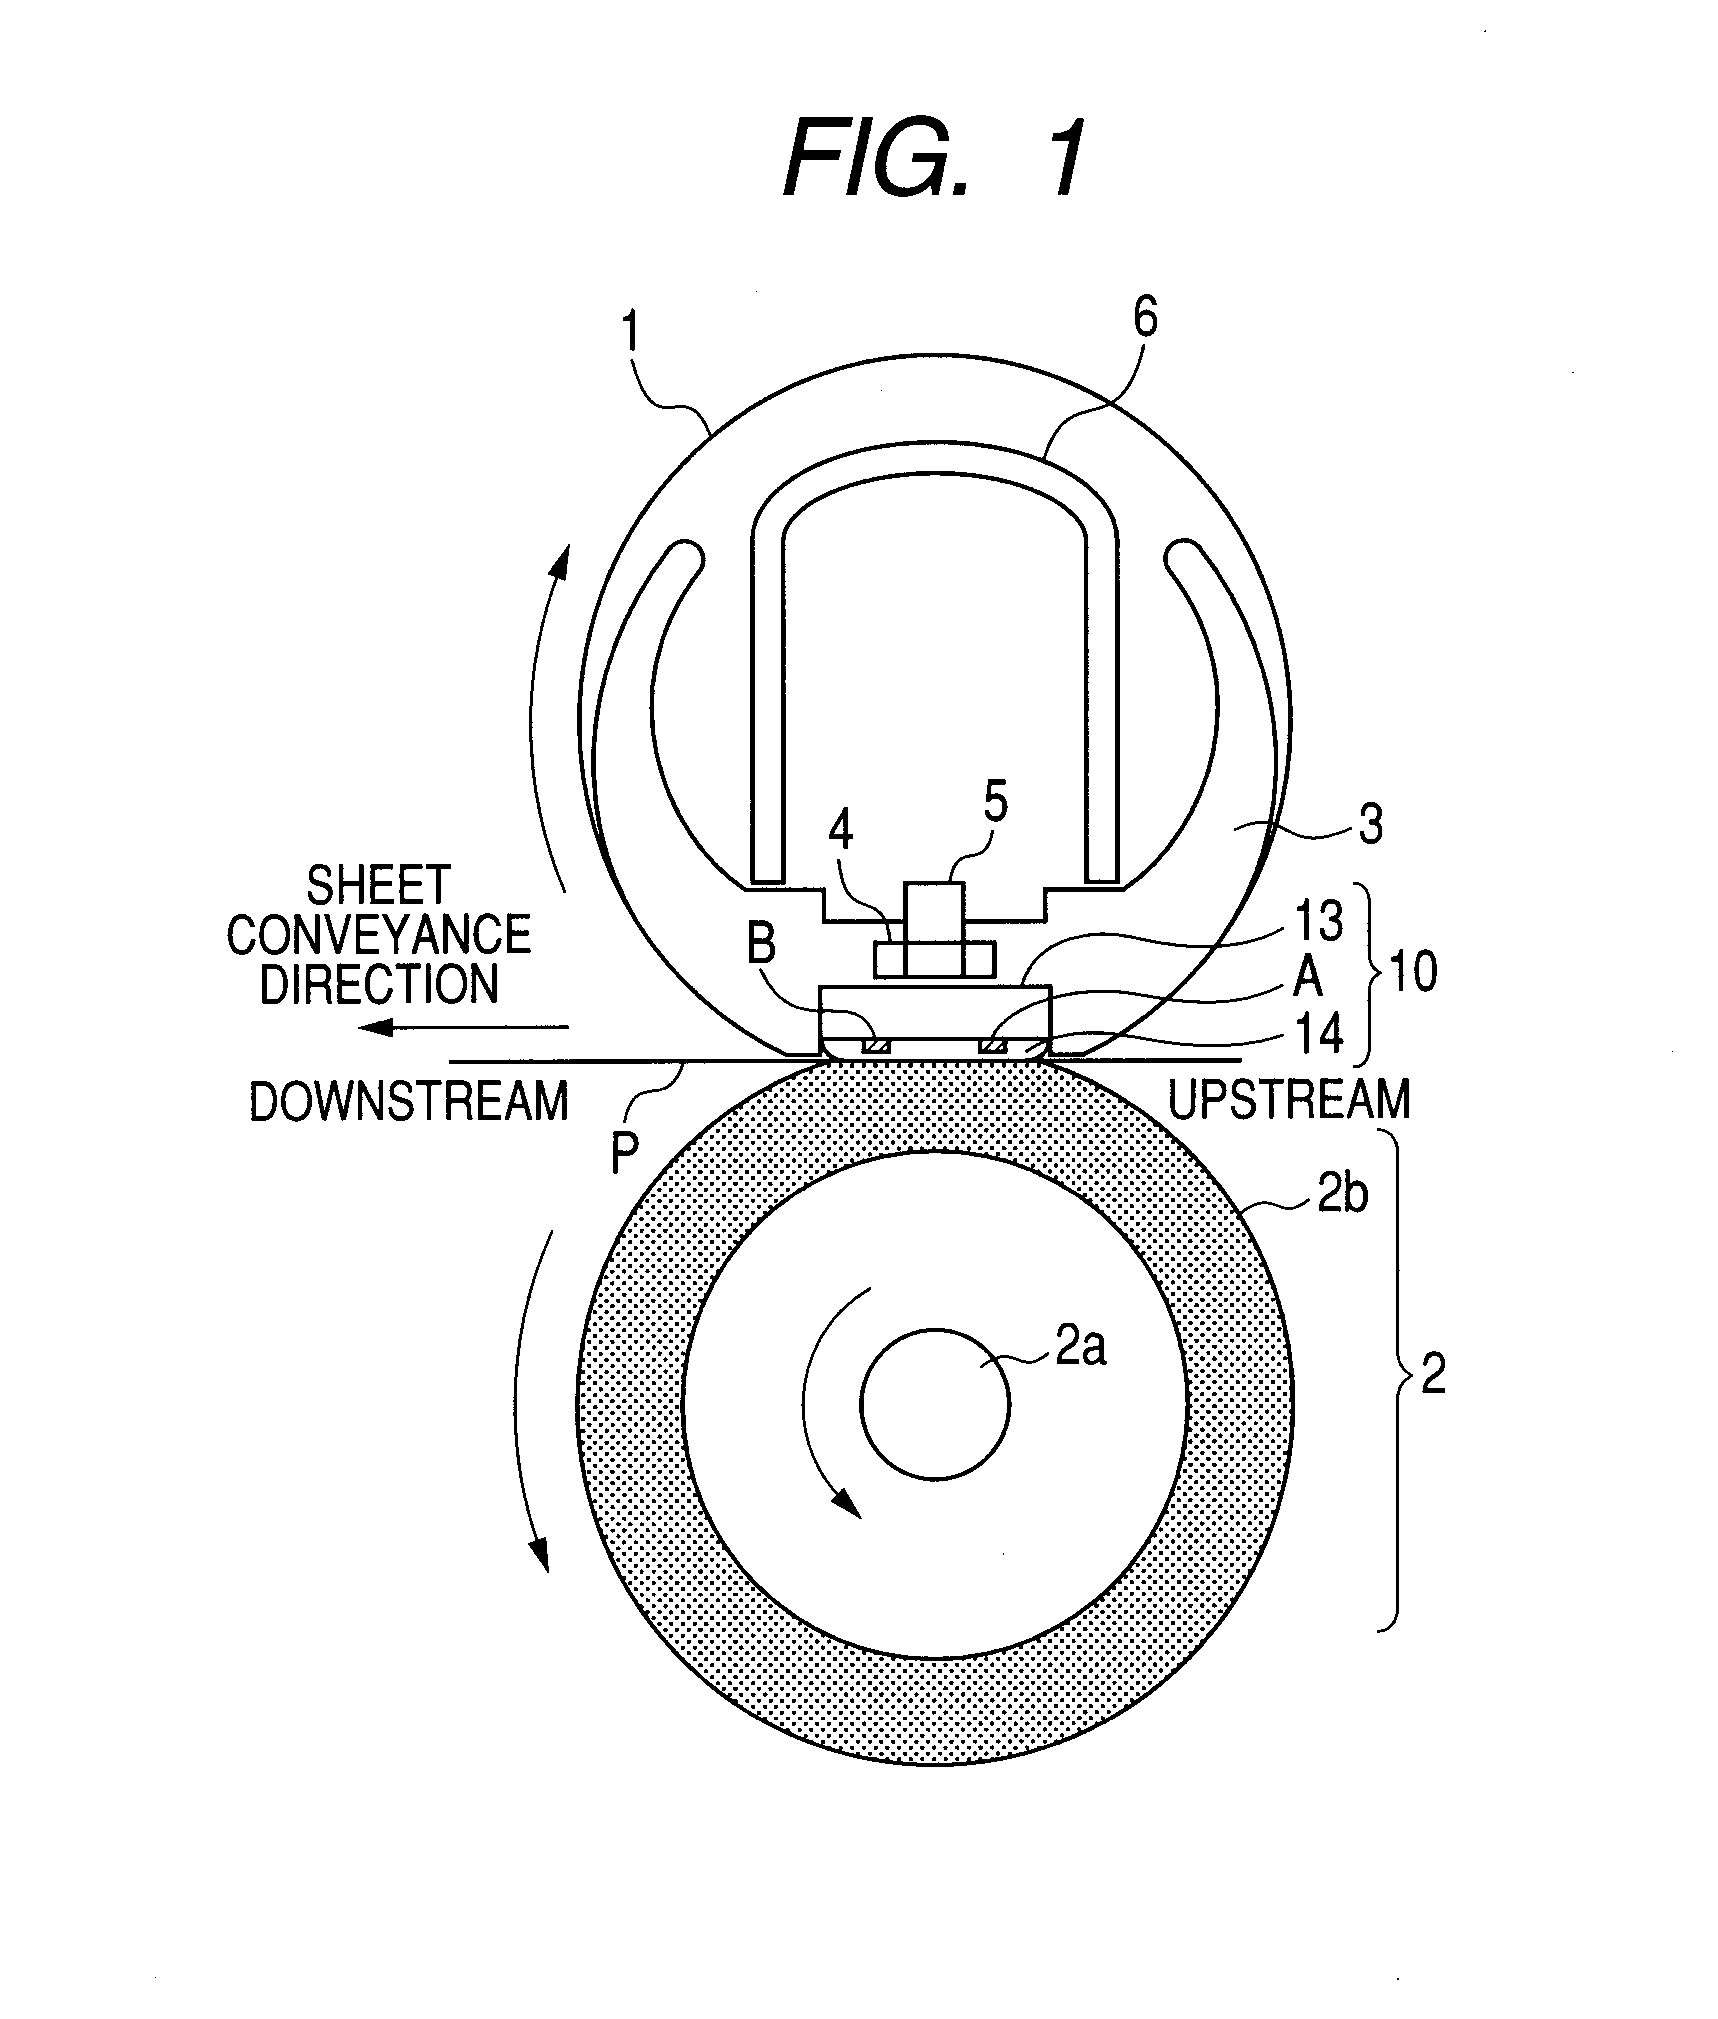 Heater, image heating device with the heater and image forming apparatus therein